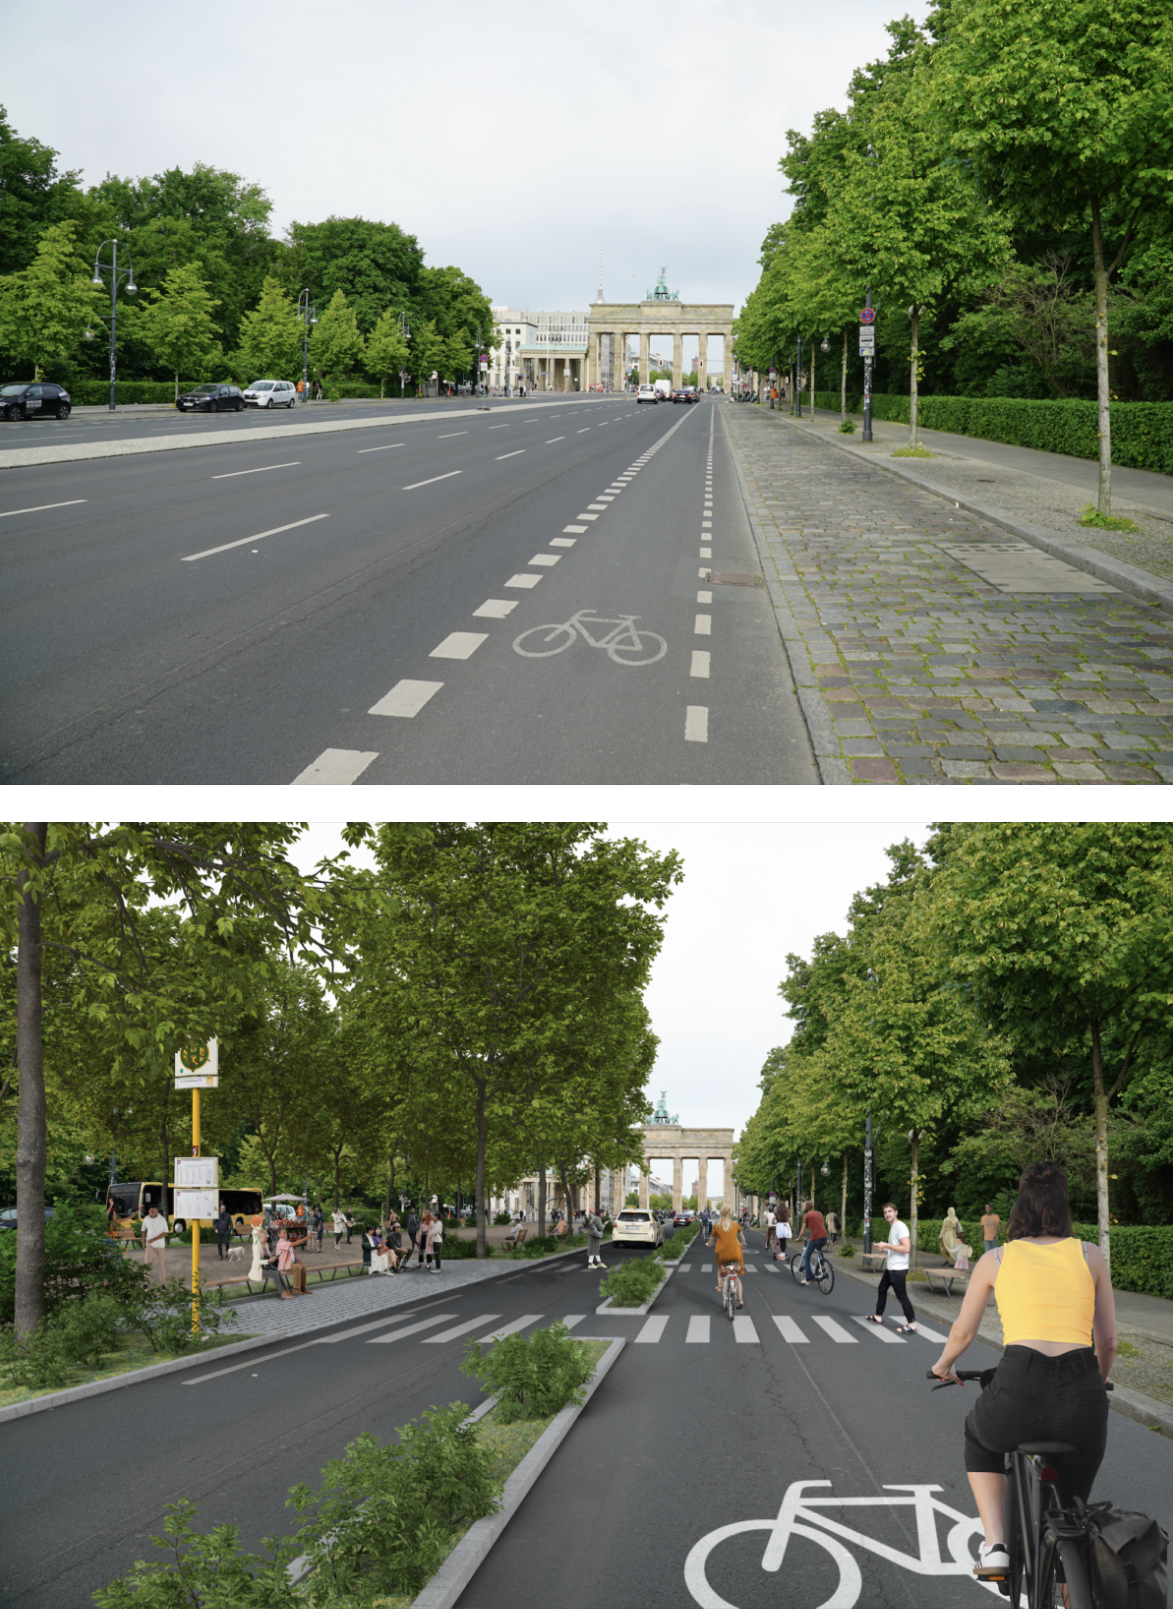 The road leading to the Brandenburg Gate today (top) and in a car-free Berlin, as rendered by campaigners (bottom). Volksentscheid Berlin Autofrei.